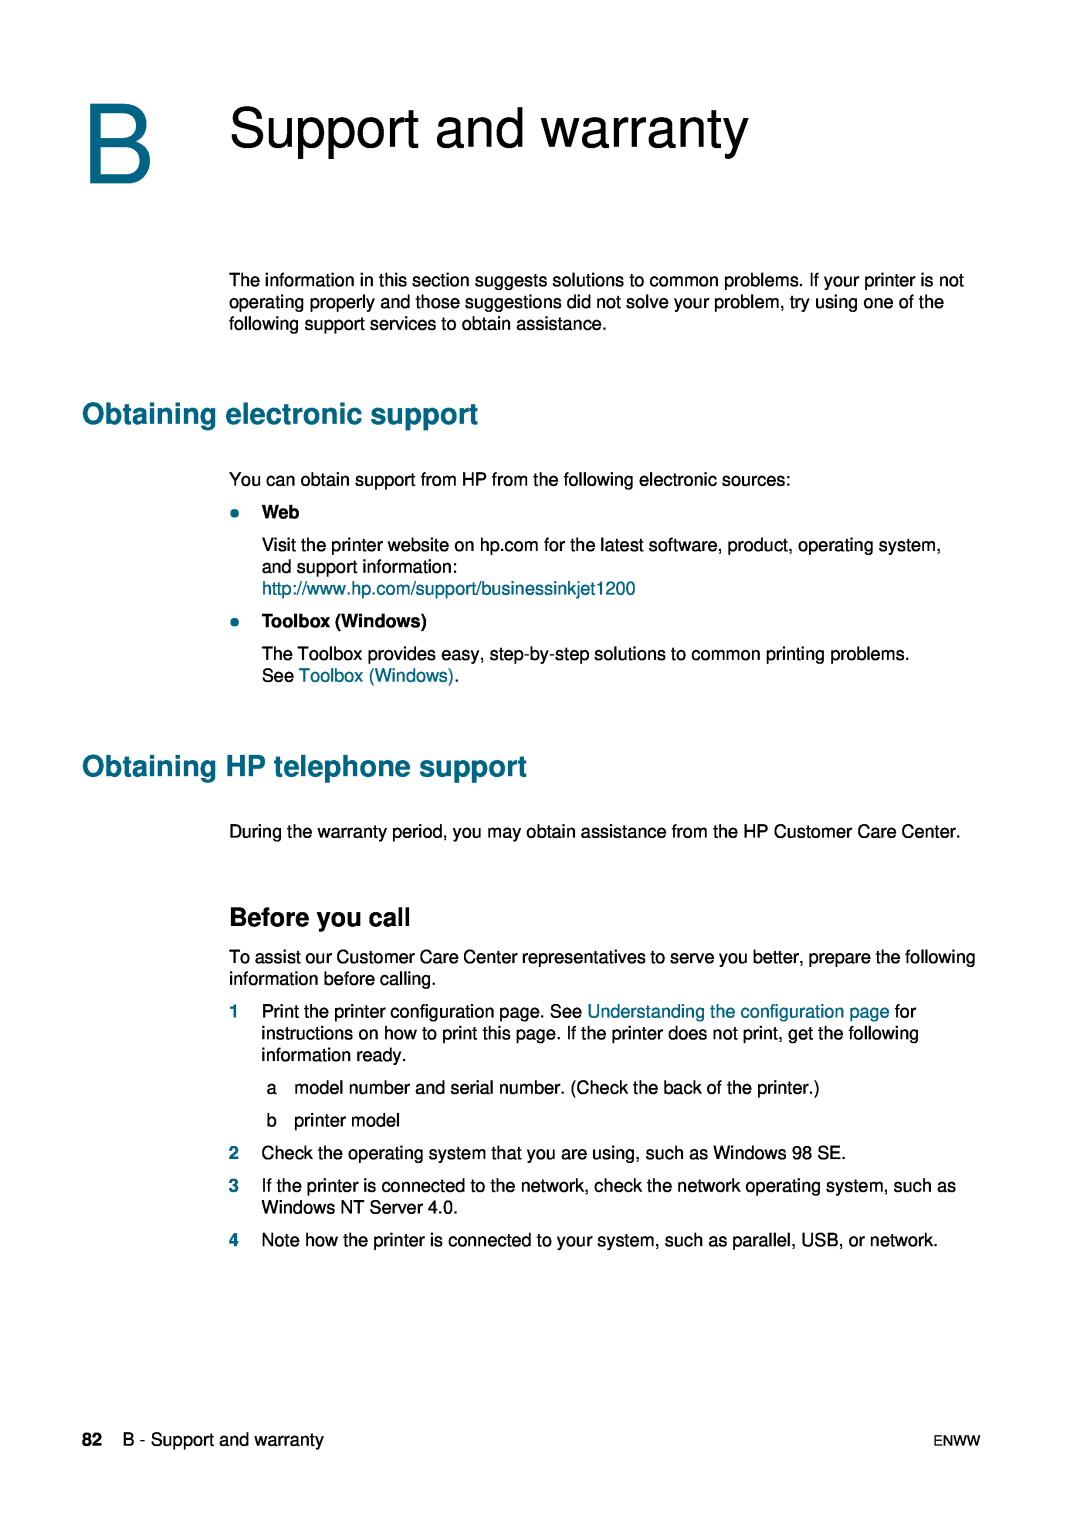 HP 1200 manual B Support and warranty, Obtaining electronic support, Obtaining HP telephone support, Before you call, z Web 